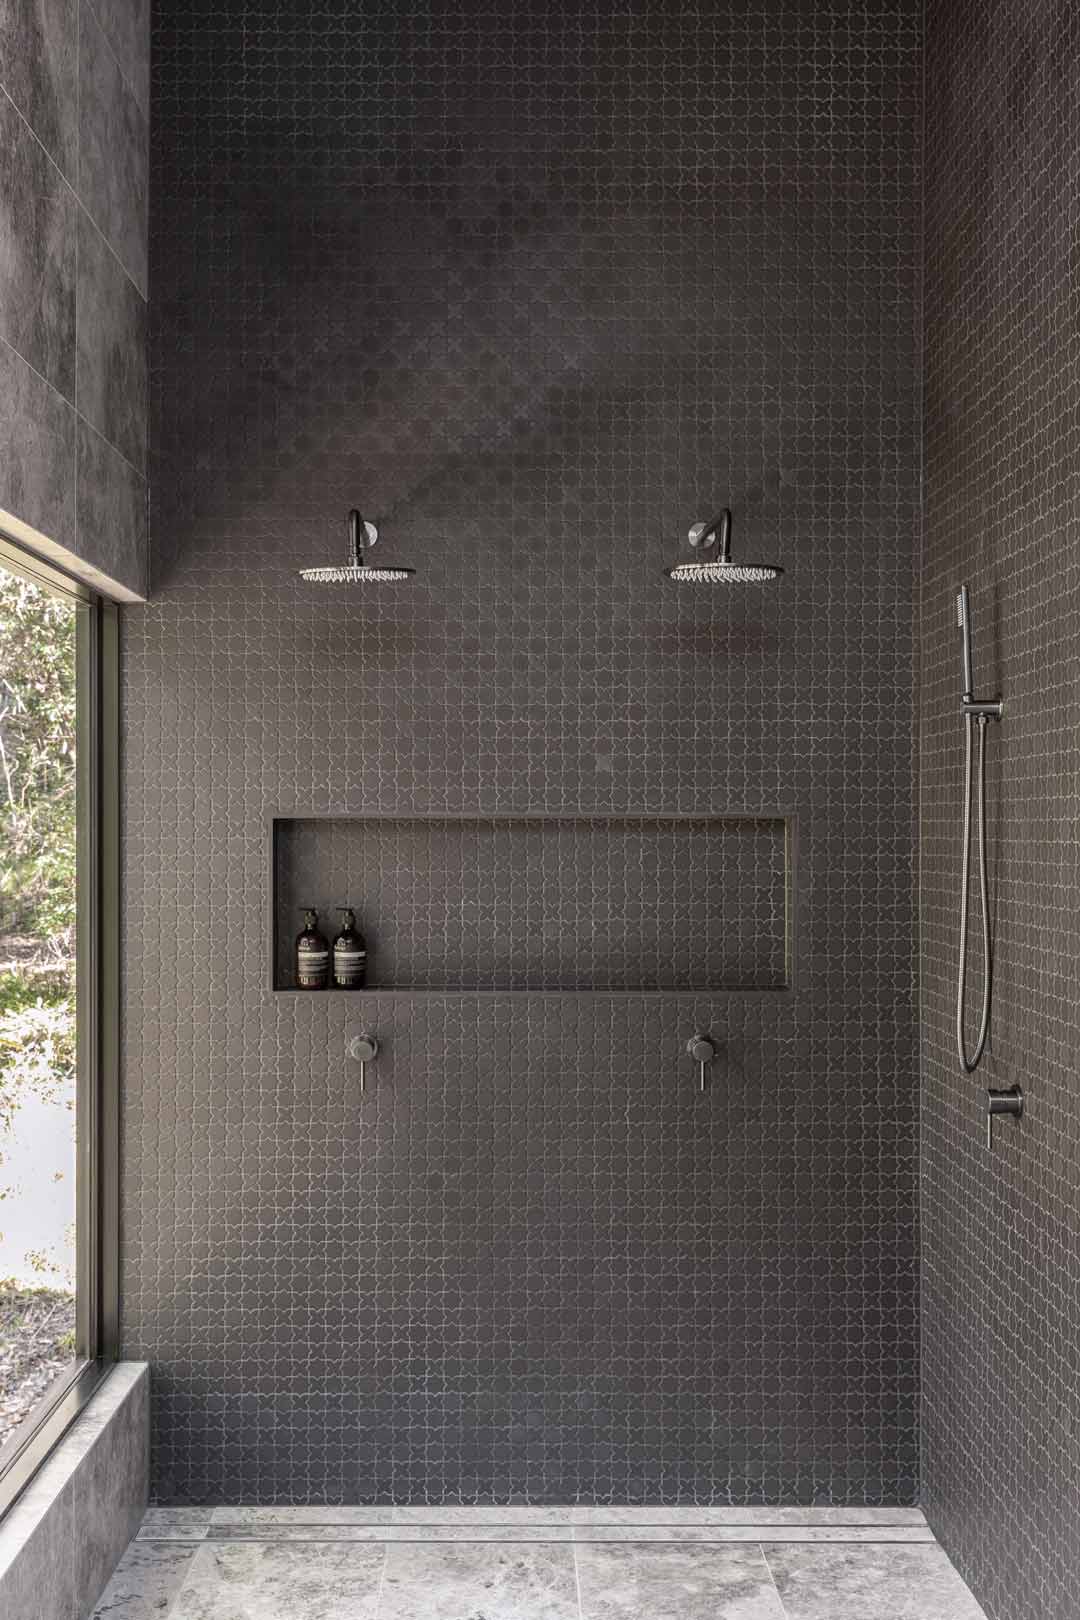 https://www.abiinteriors.co.uk/wp-content/uploads/A-double-shower-with-brushed-gunmetal-tapware-and-a-large-window-so-you-feel-like-you-are-showering-in-nature.jpg